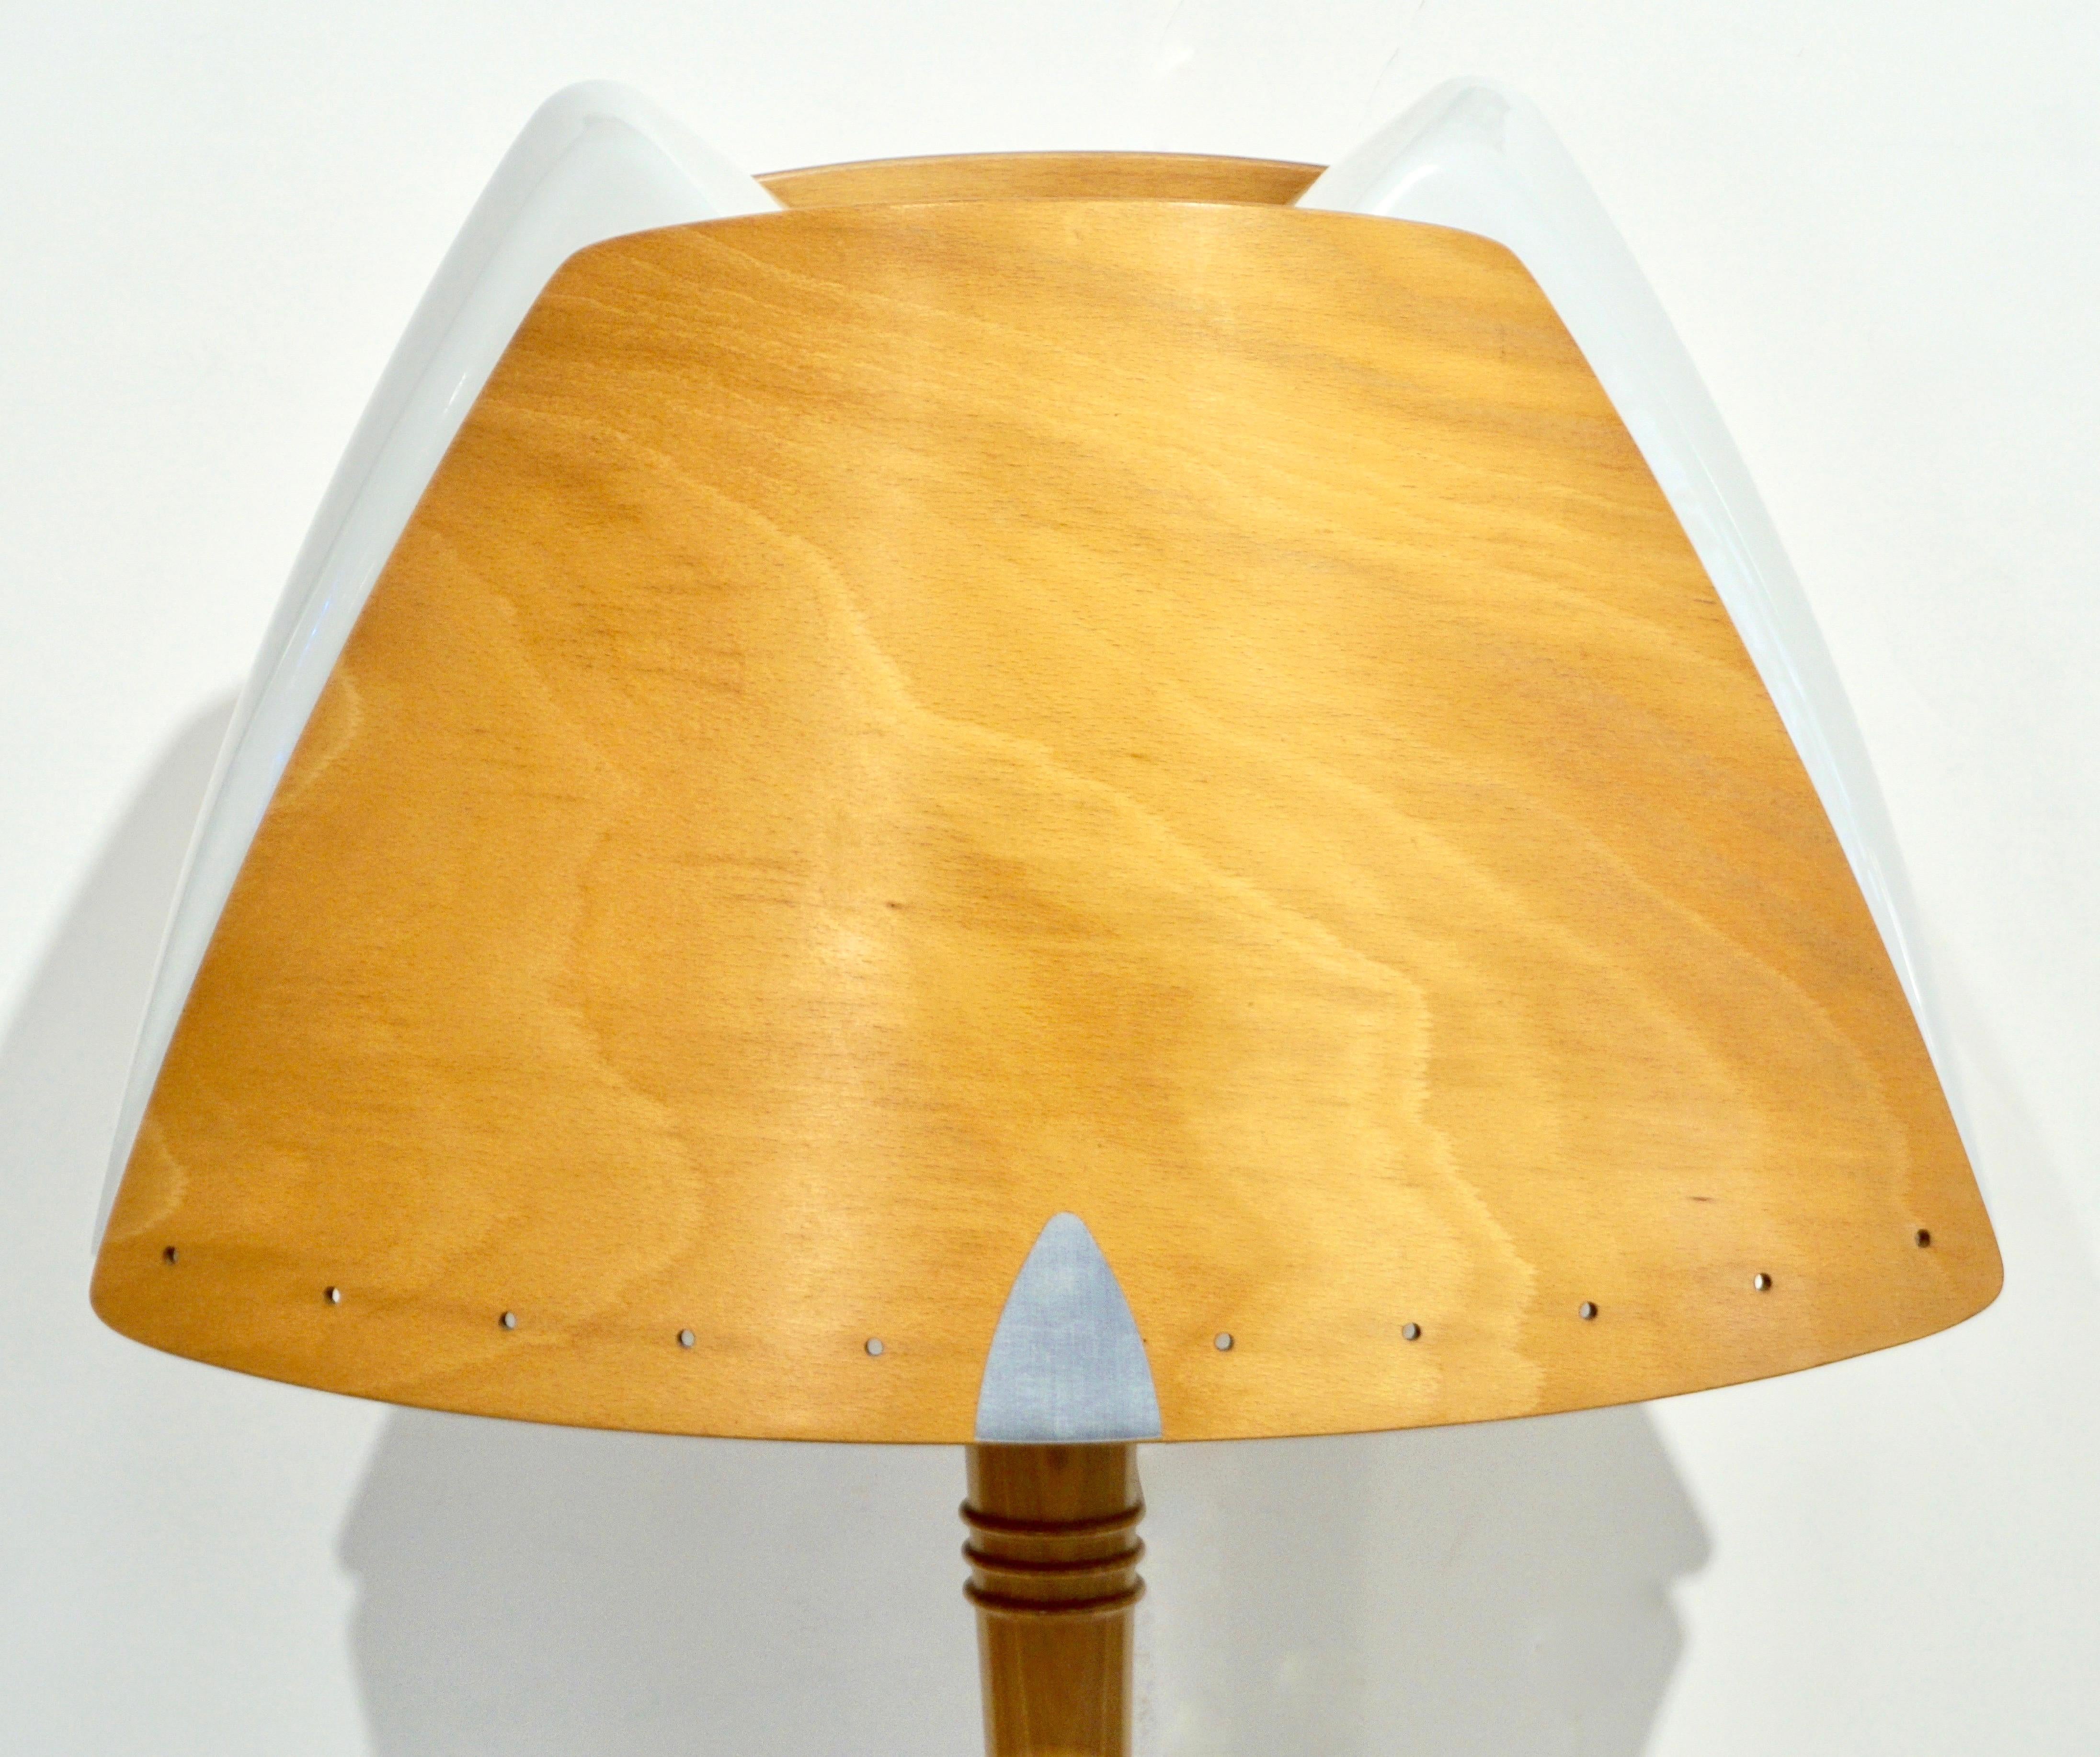 1970 French Pair of Birch Wood and Acrylic Table Lamp for Barcelona Hilton Hotel For Sale 8